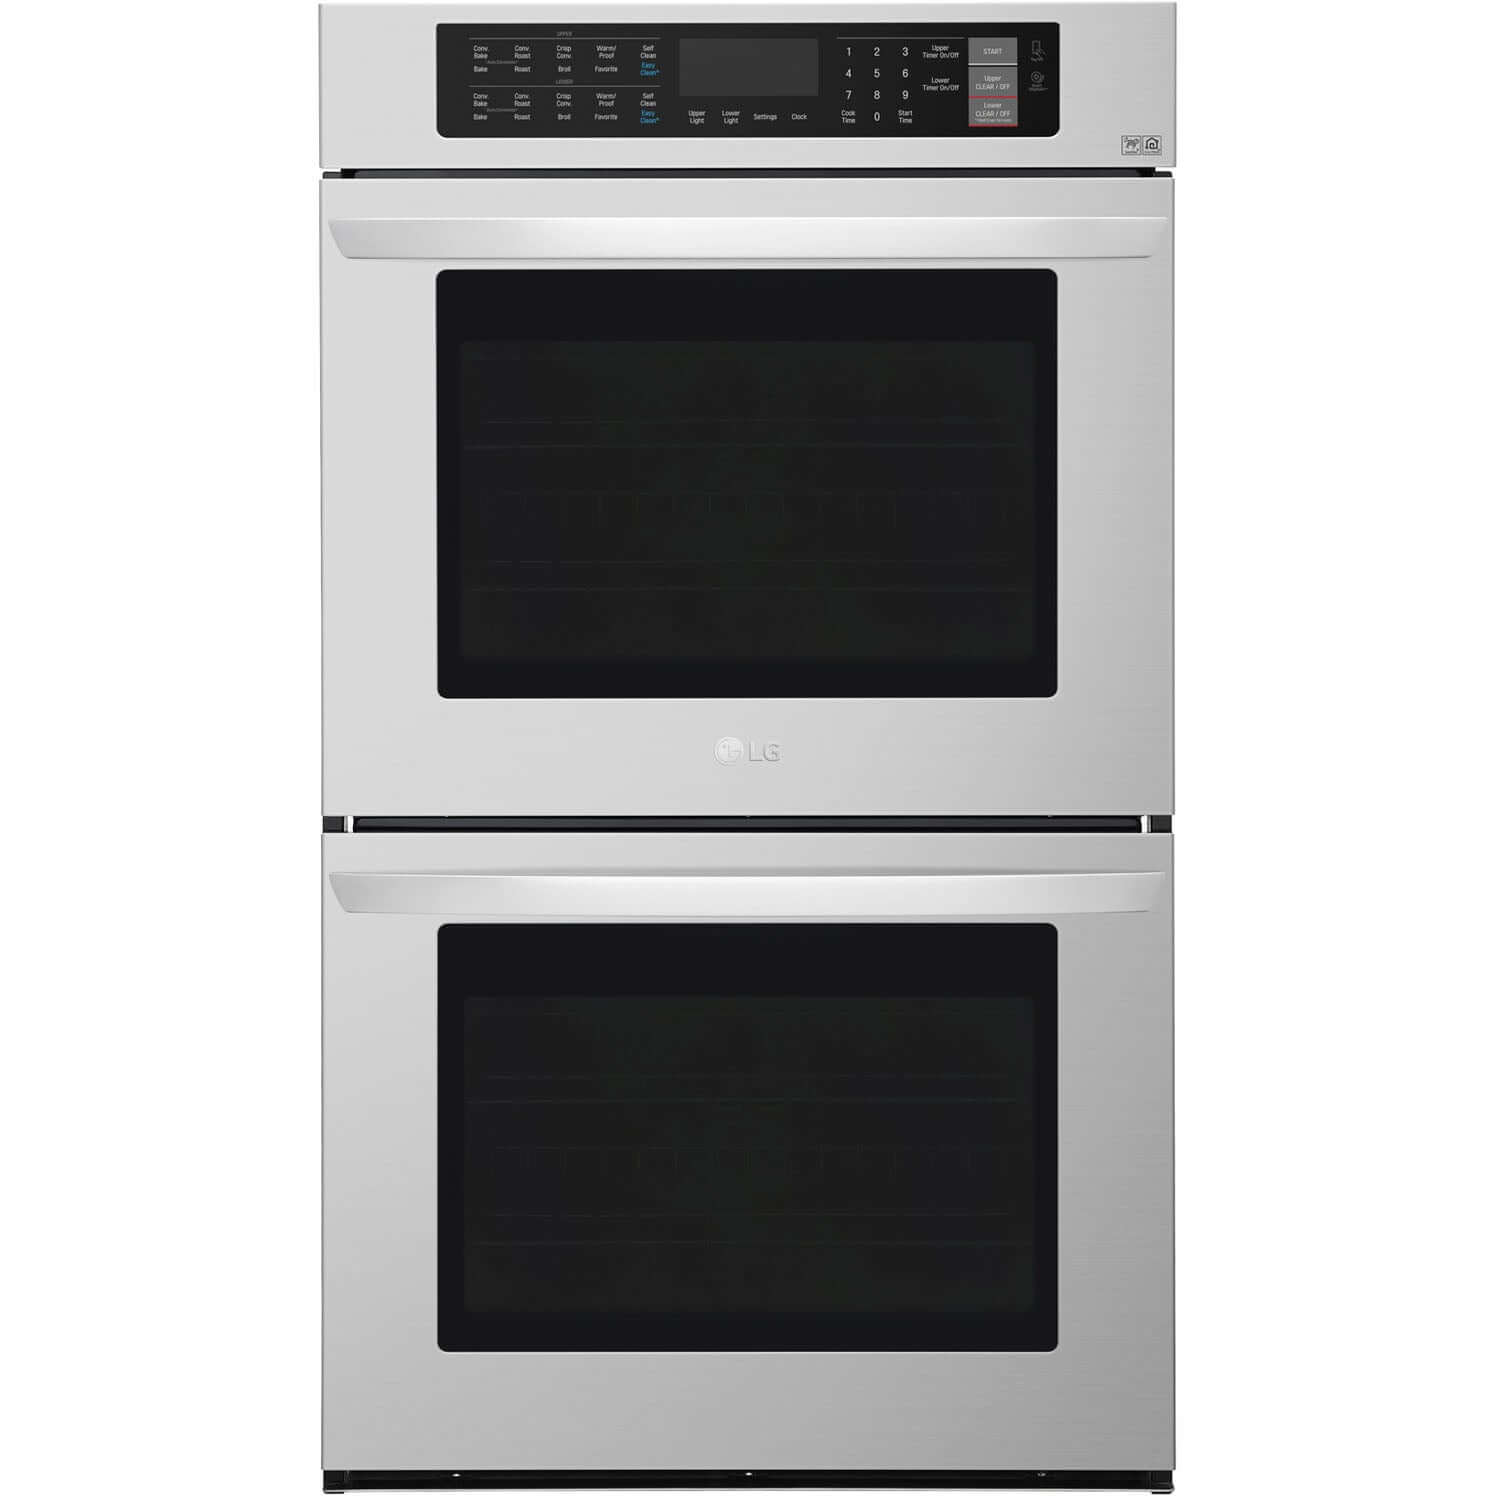 LG 30 in. Electric Double Wall Oven with True Convection in Stainless Steel (LWD3063ST)